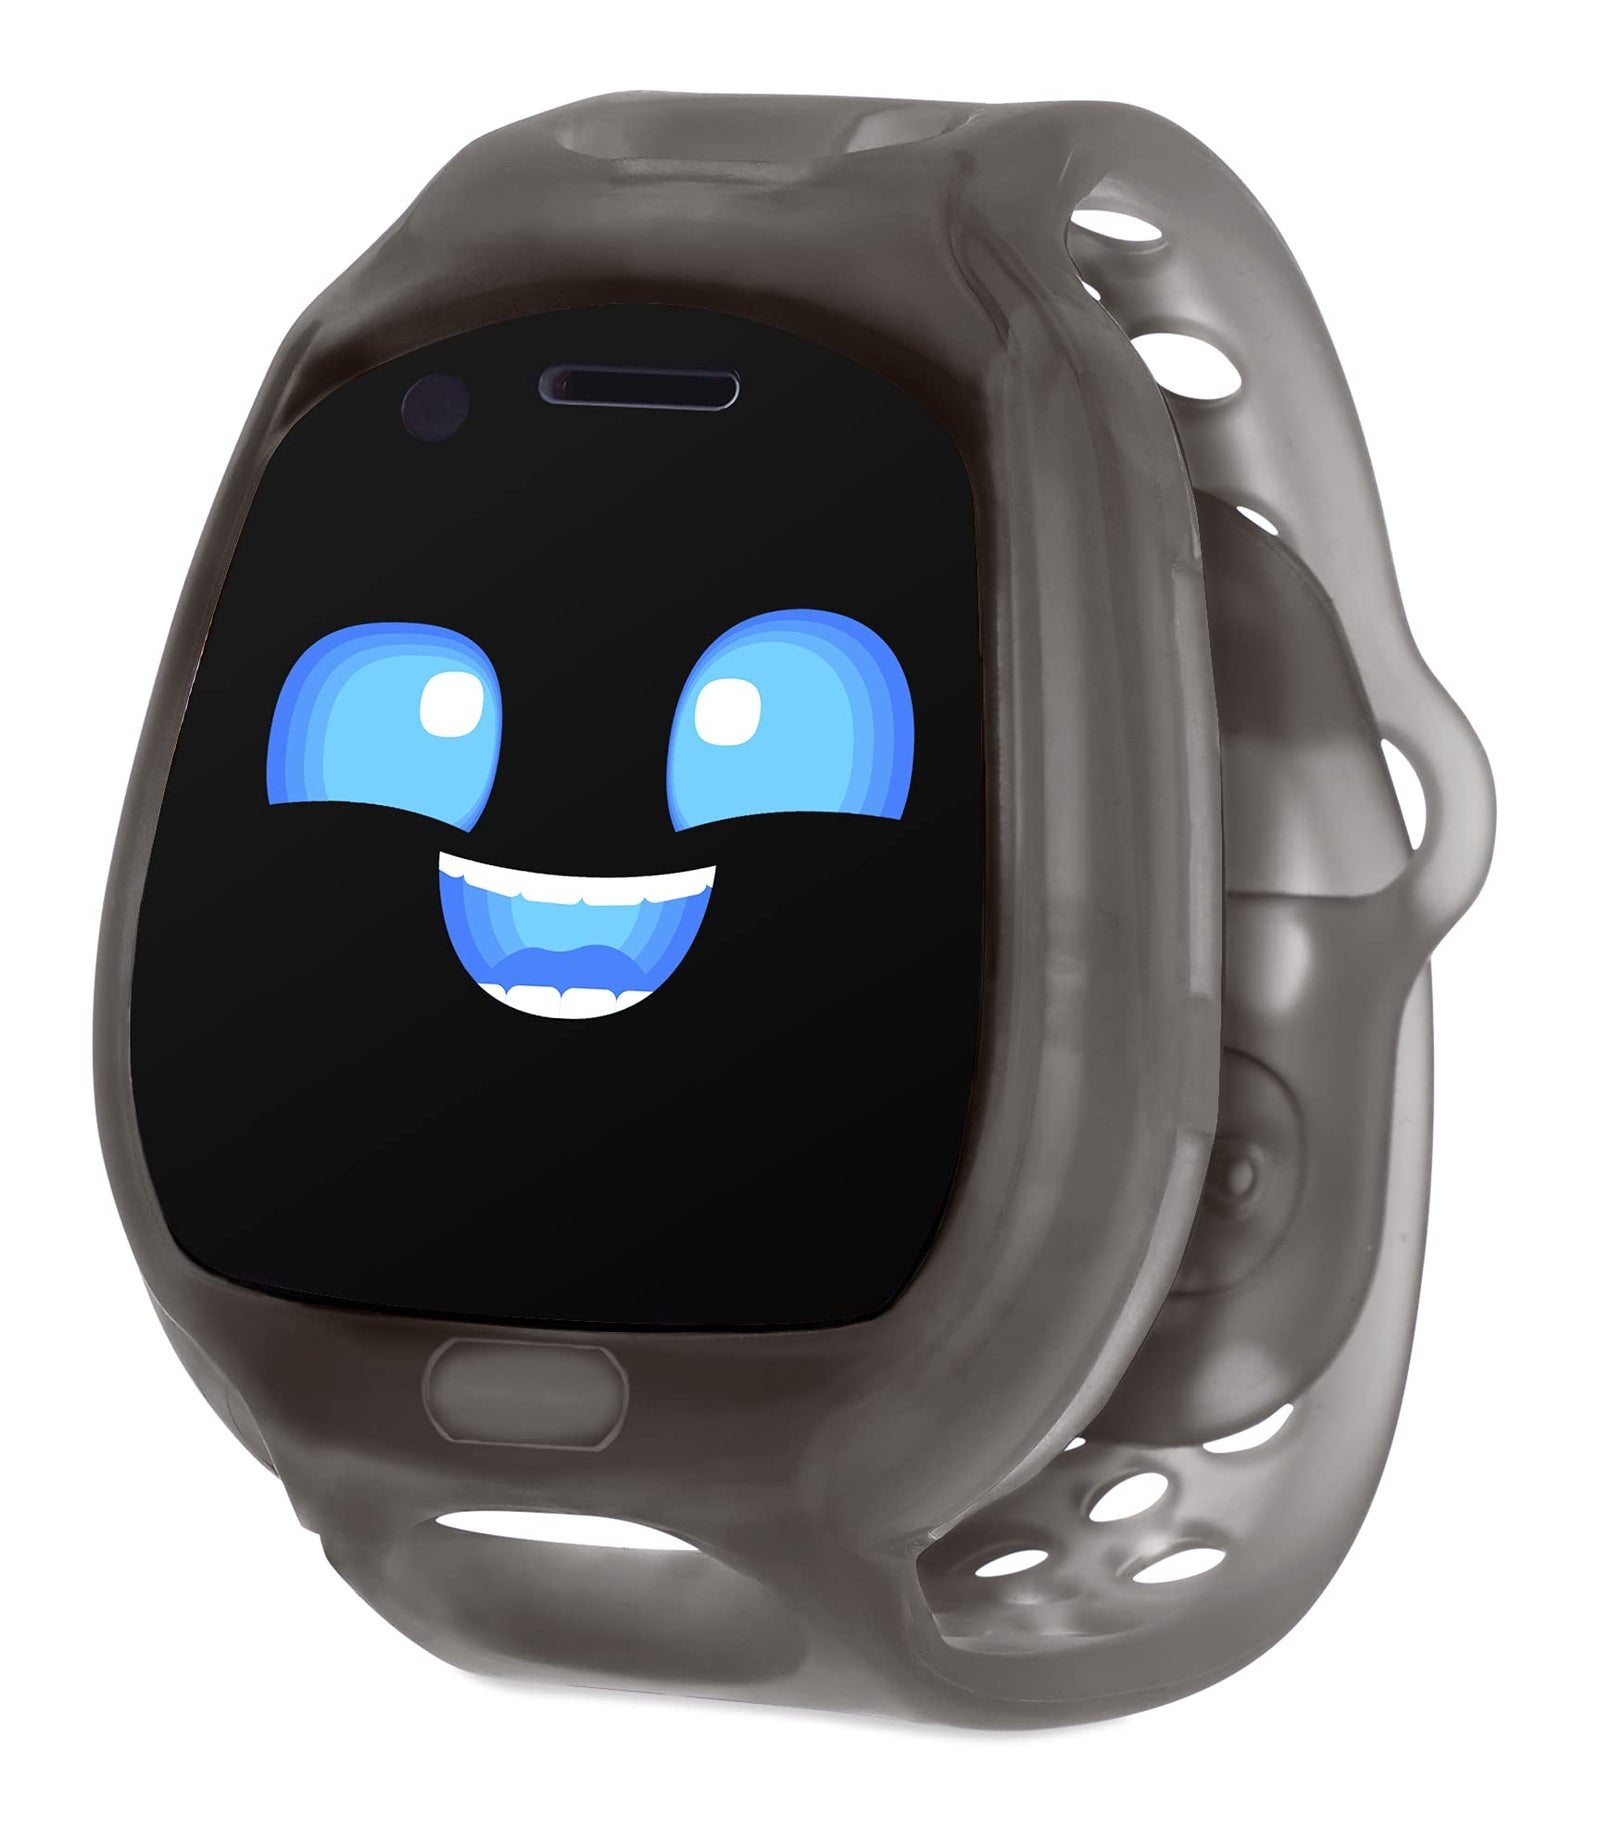 Little Tikes Tobi 2 Robot Smartwatch Amazon Exclusive, Gaming, Advanced Graphics, Motion-Activated Selfie Camera, Fun Expressions, Games, Pedometer, Splashproof, Wireless Connectivity, Video, Black 6+